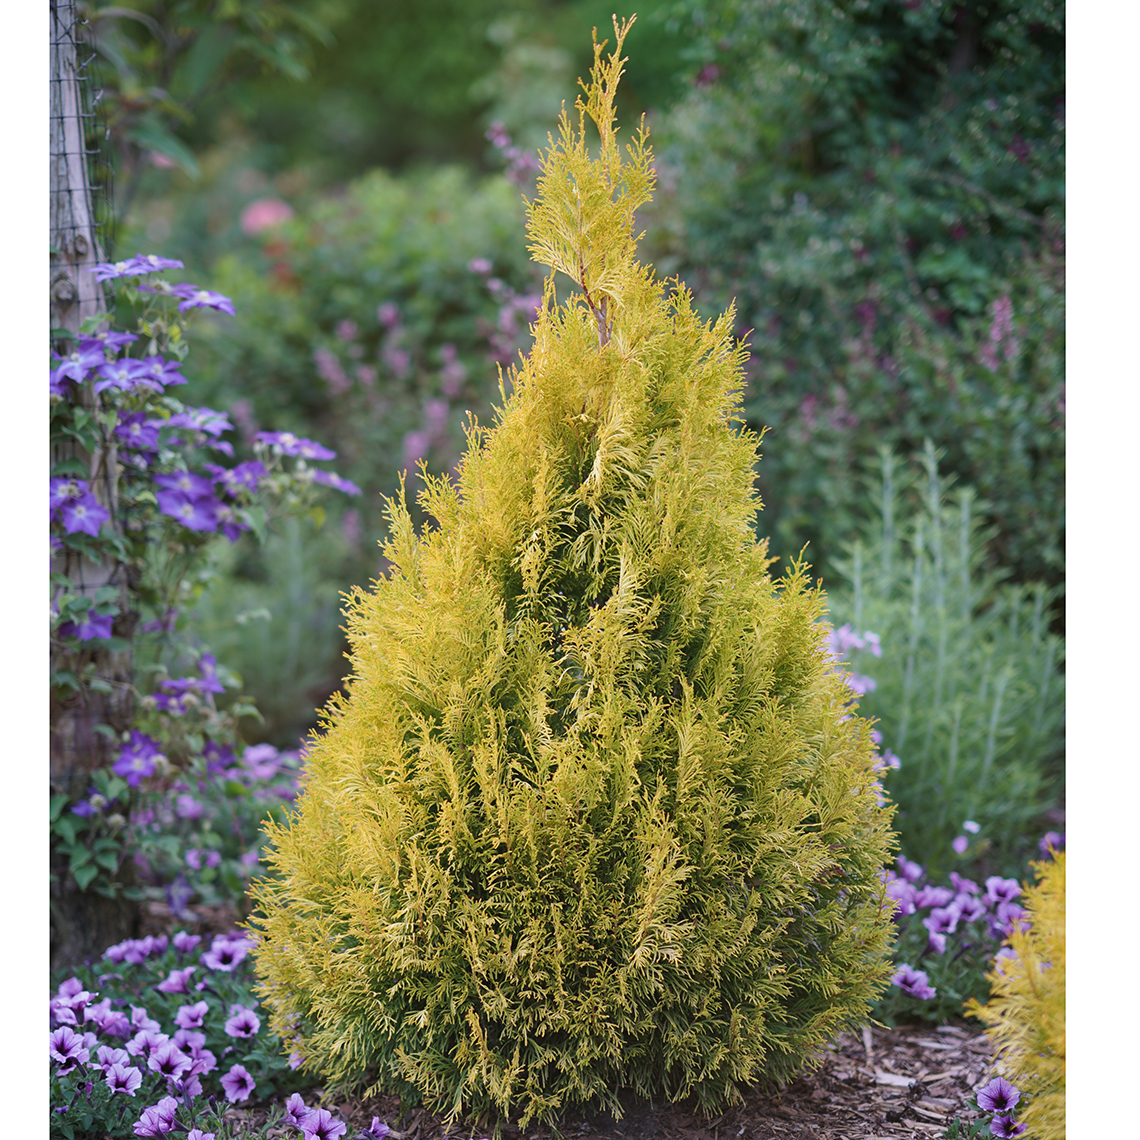 A single specimen of bright gold Fluffy Western arborvitae surrounded by purple petunias